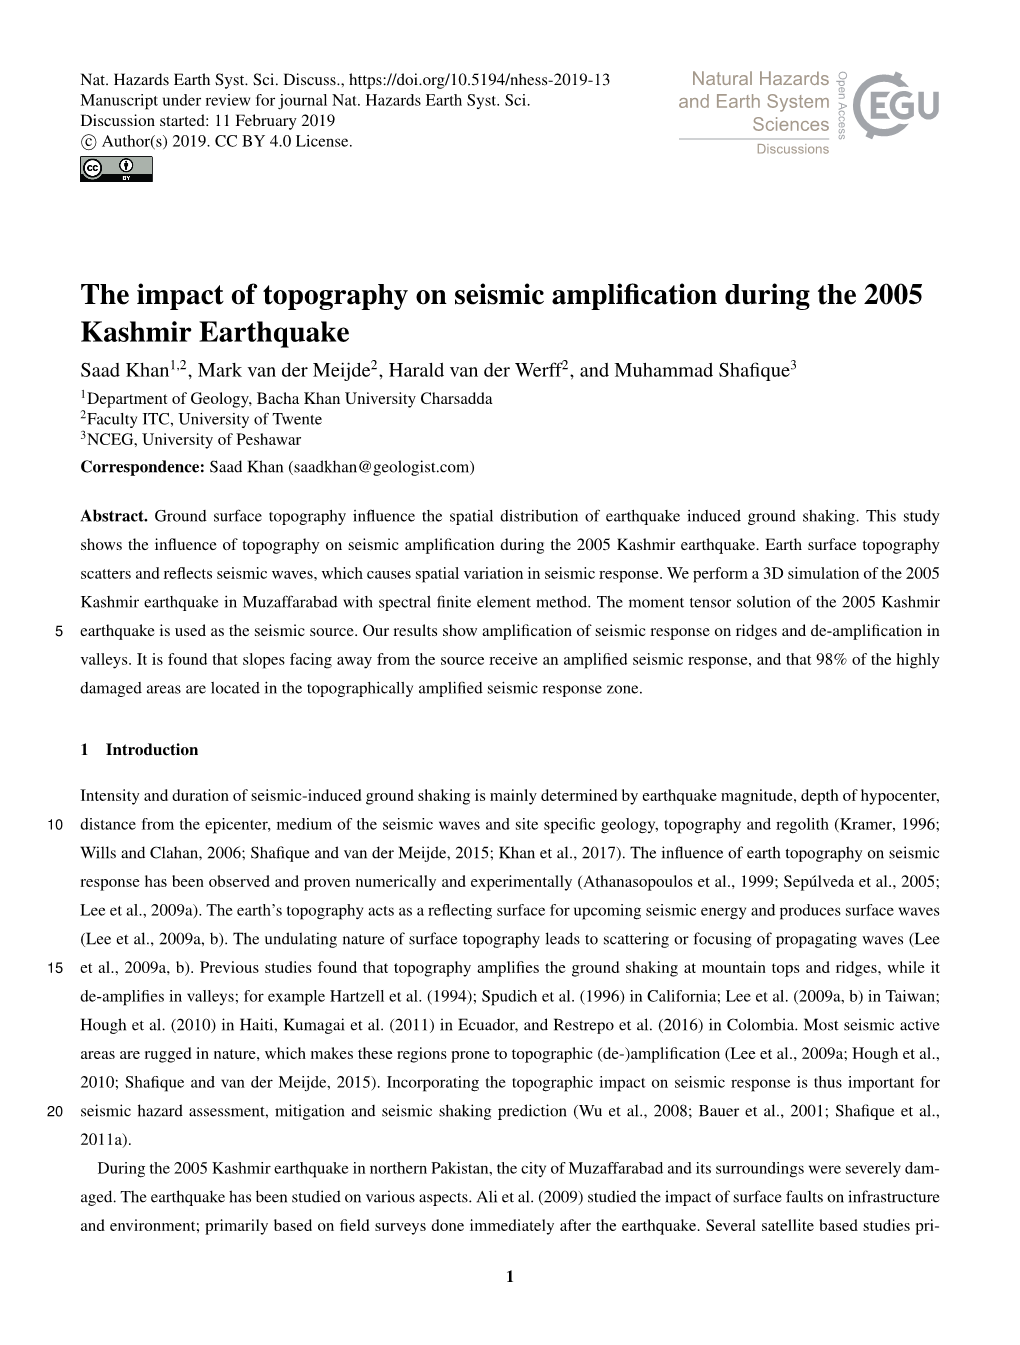 The Impact of Topography on Seismic Amplification During the 2005